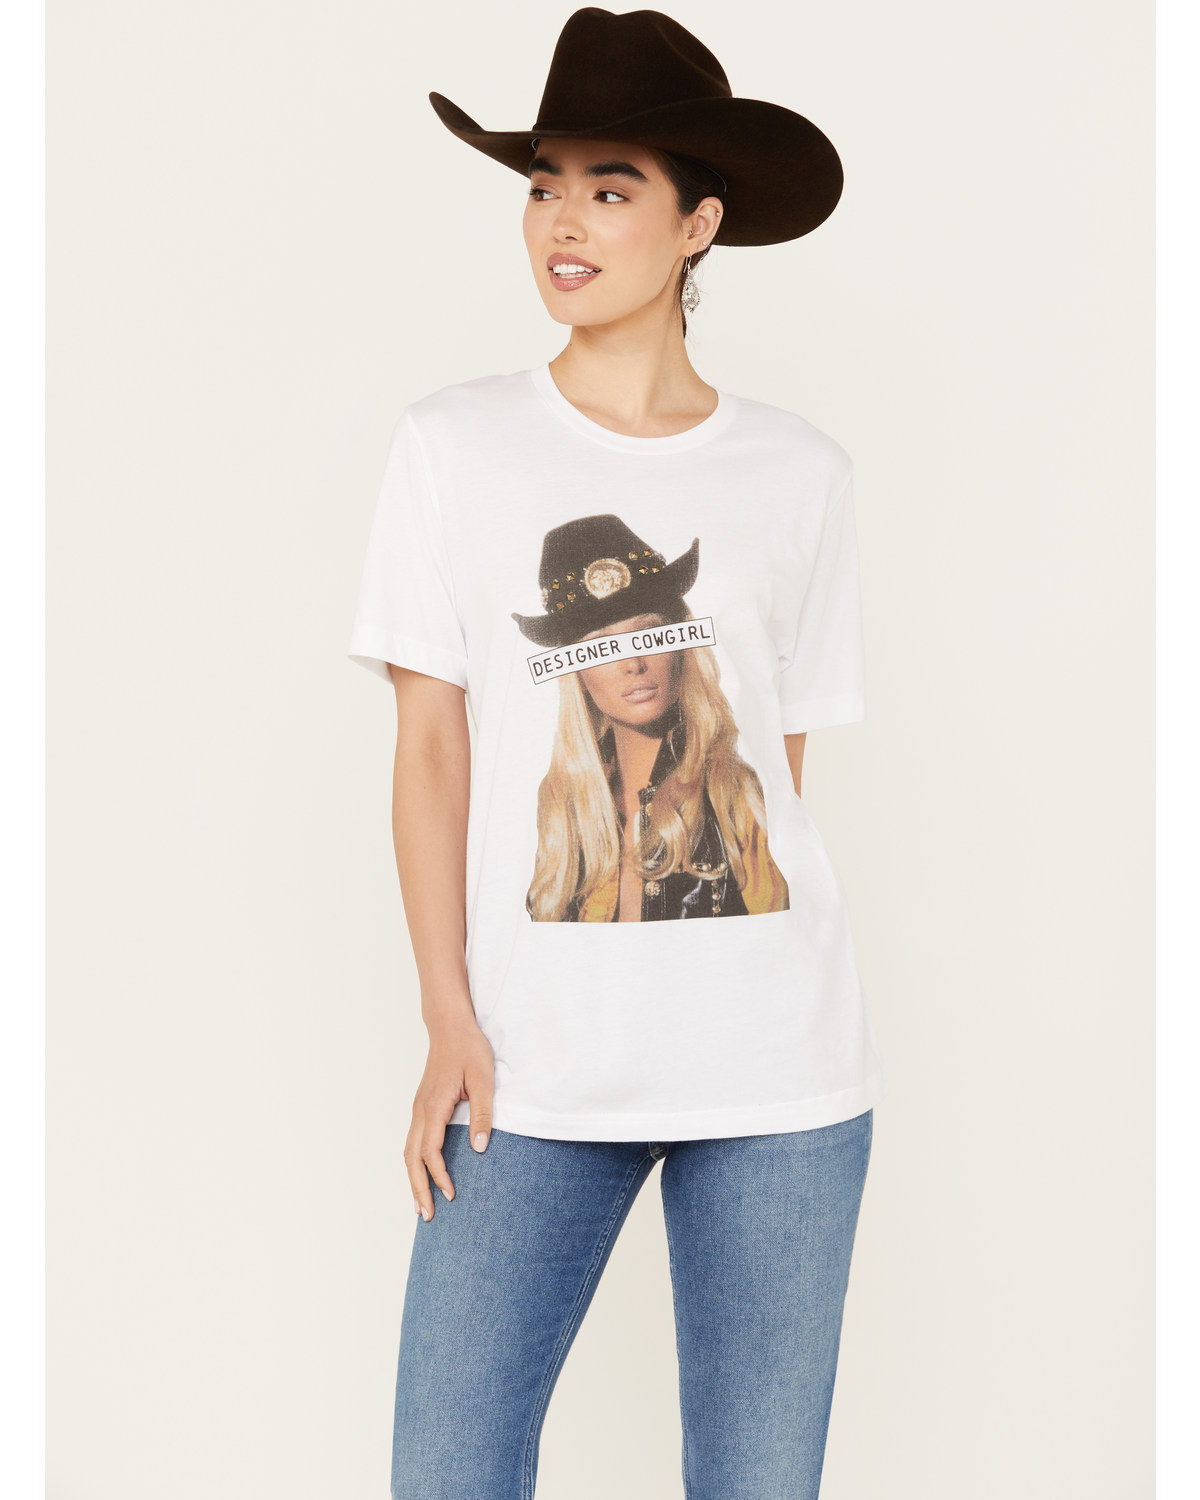 Gina Tees Women's Embellished Designer Cowgirl Graphic Tee